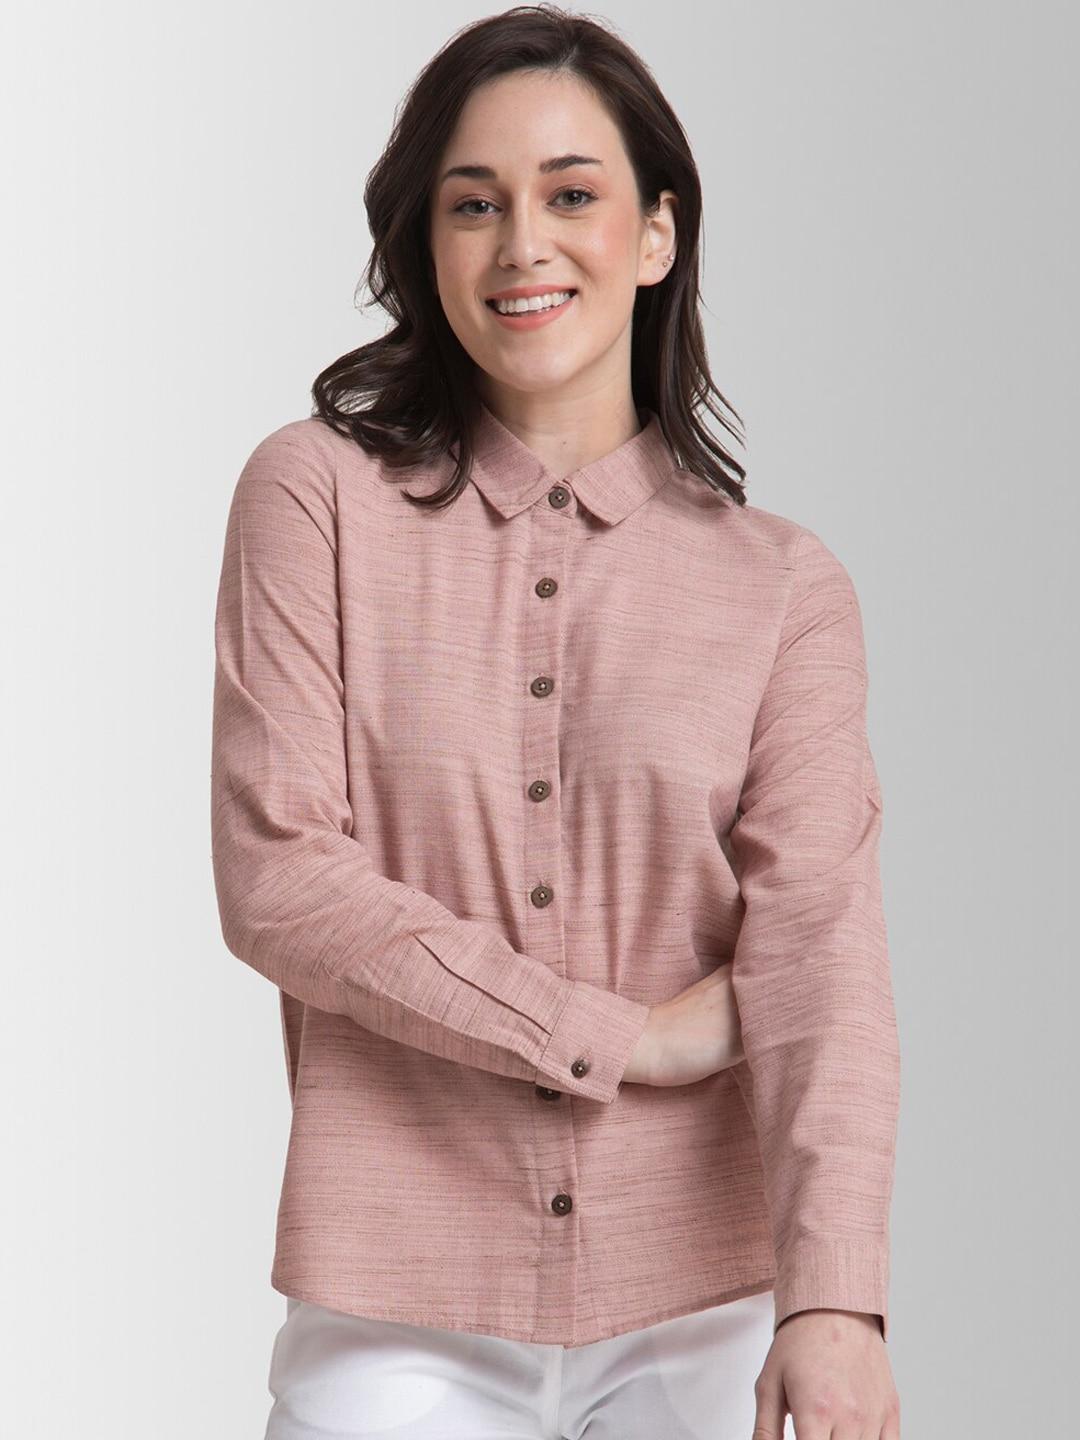 fablestreet women pink boxy solid casual shirt